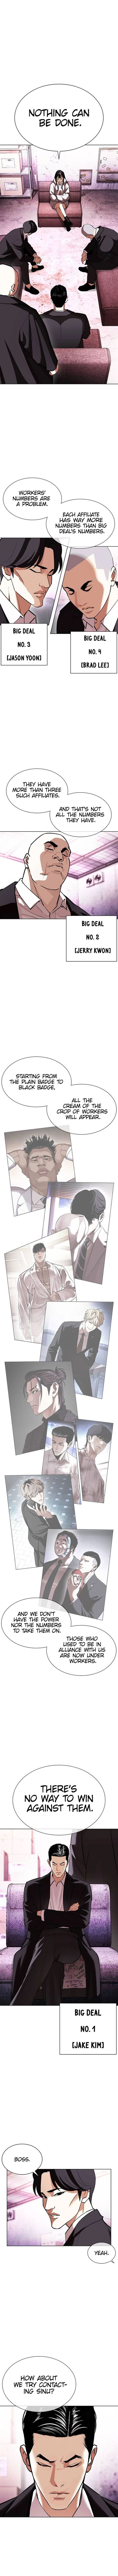 Lookism Chapter 412 image 07